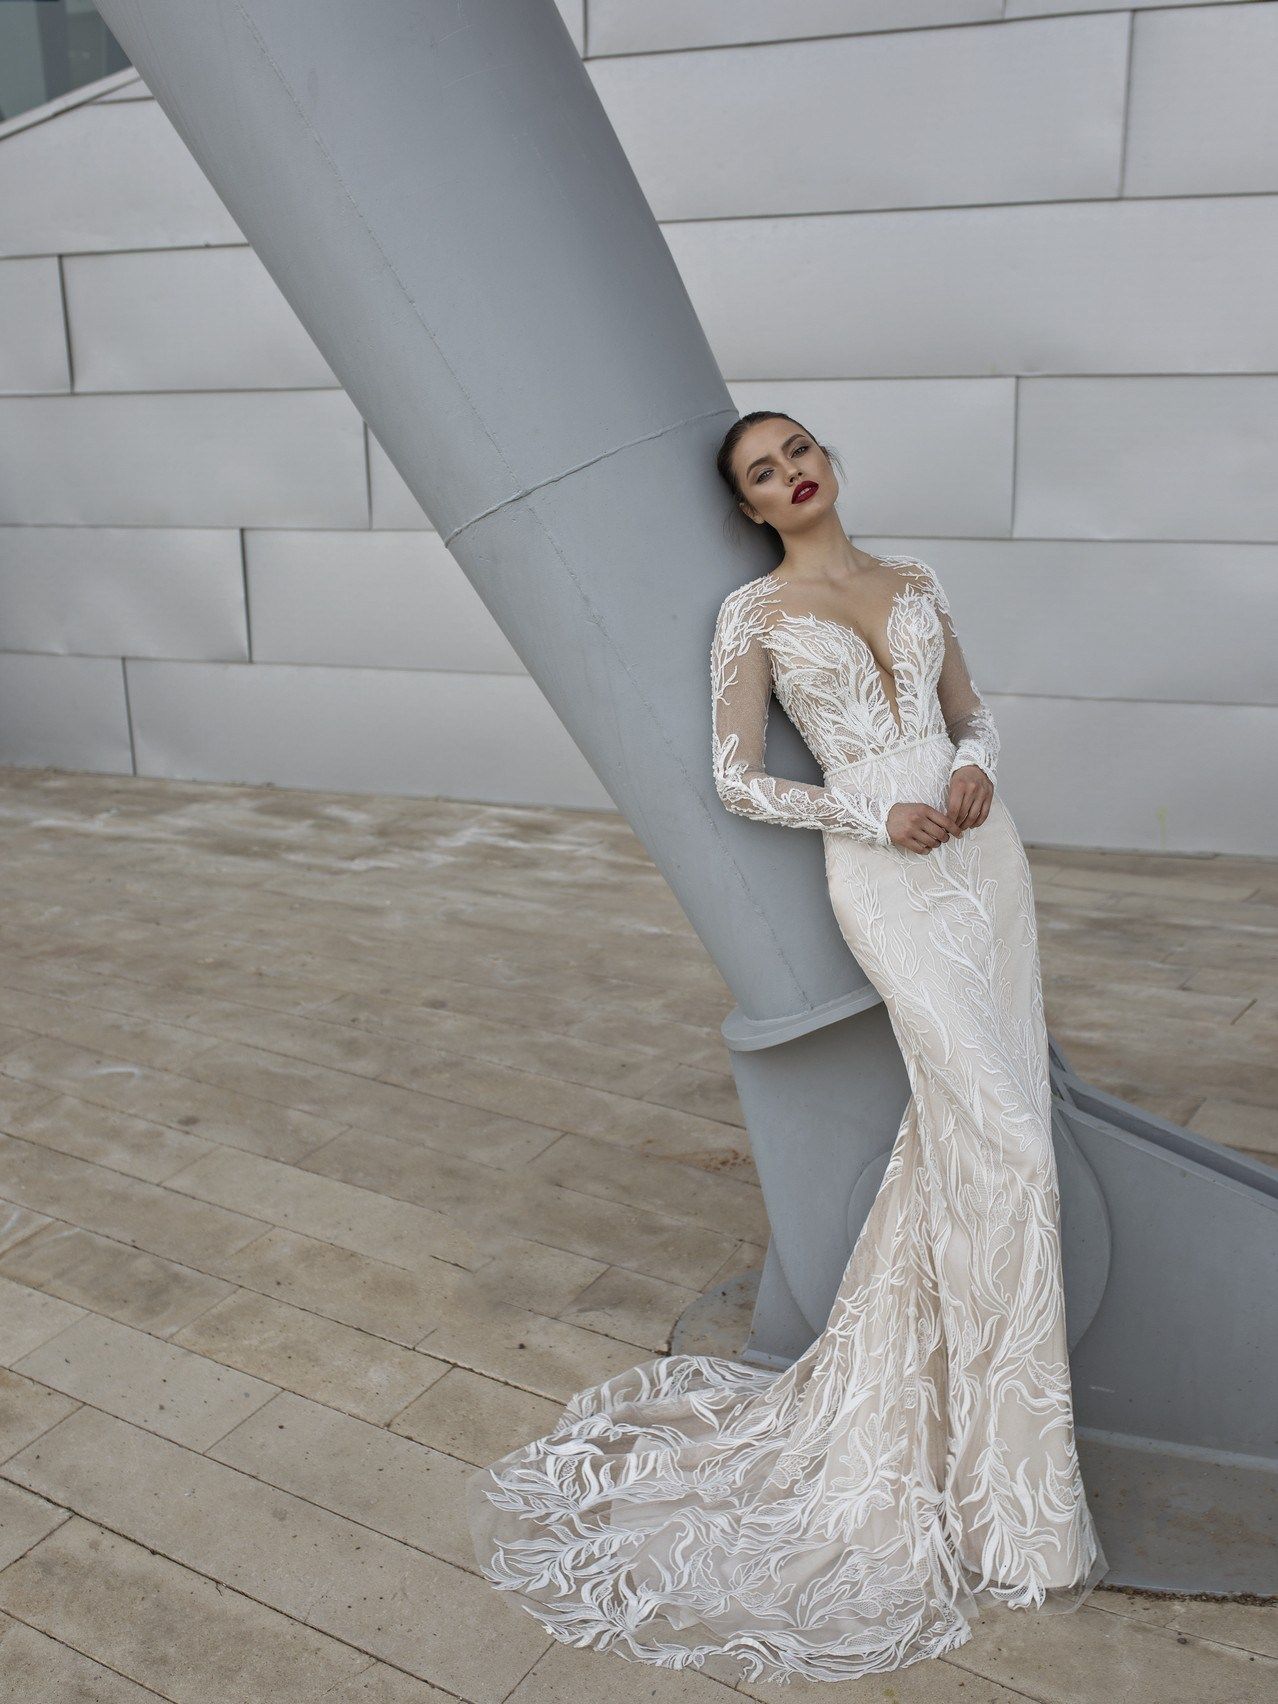 Sheath Wedding Dress With Lace Bodice And Stretch Crepe Skirt